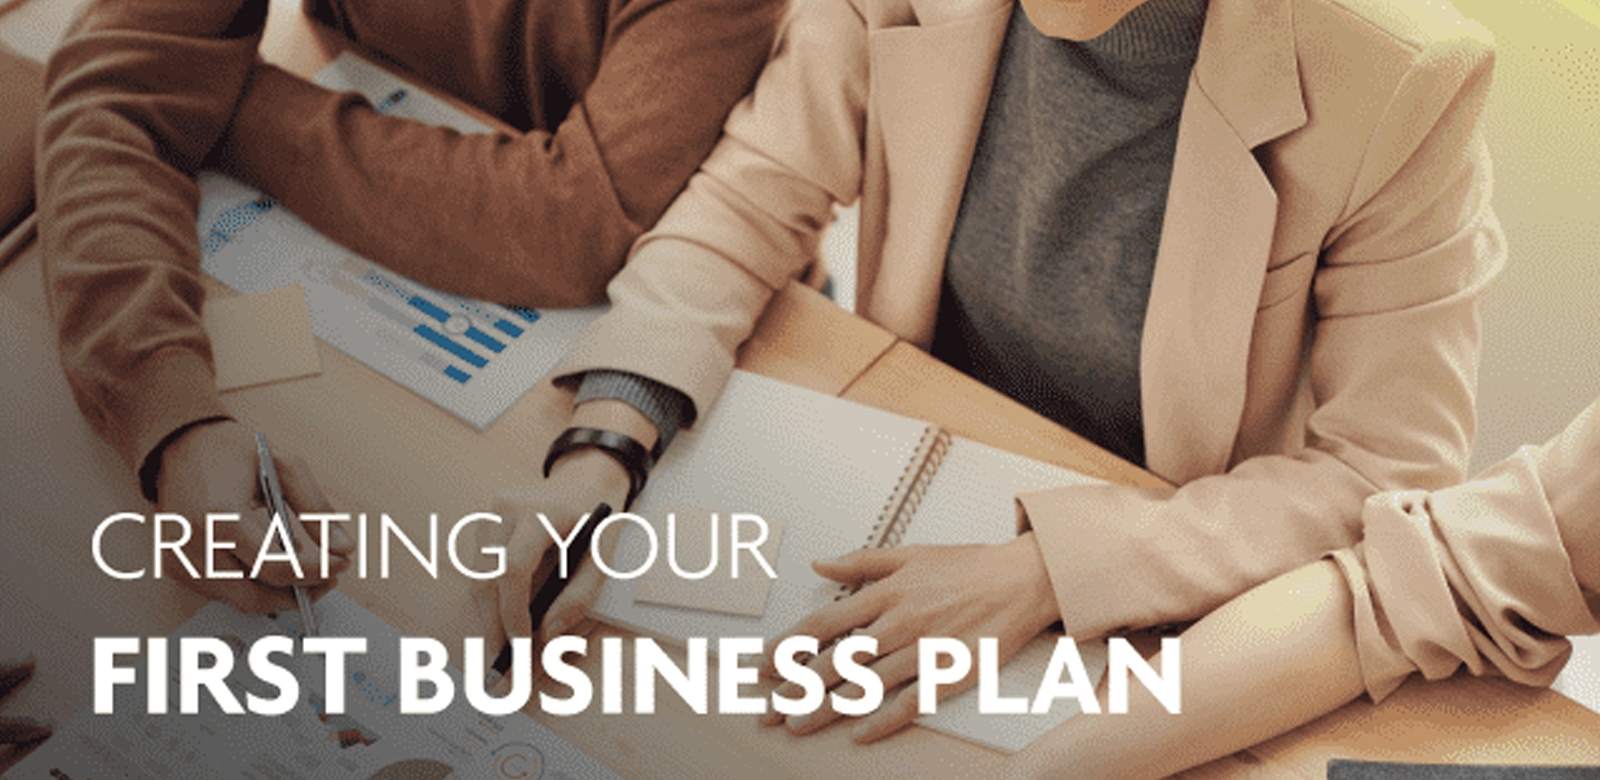 CREATING YOUR FIRST BUSINESS PLAN